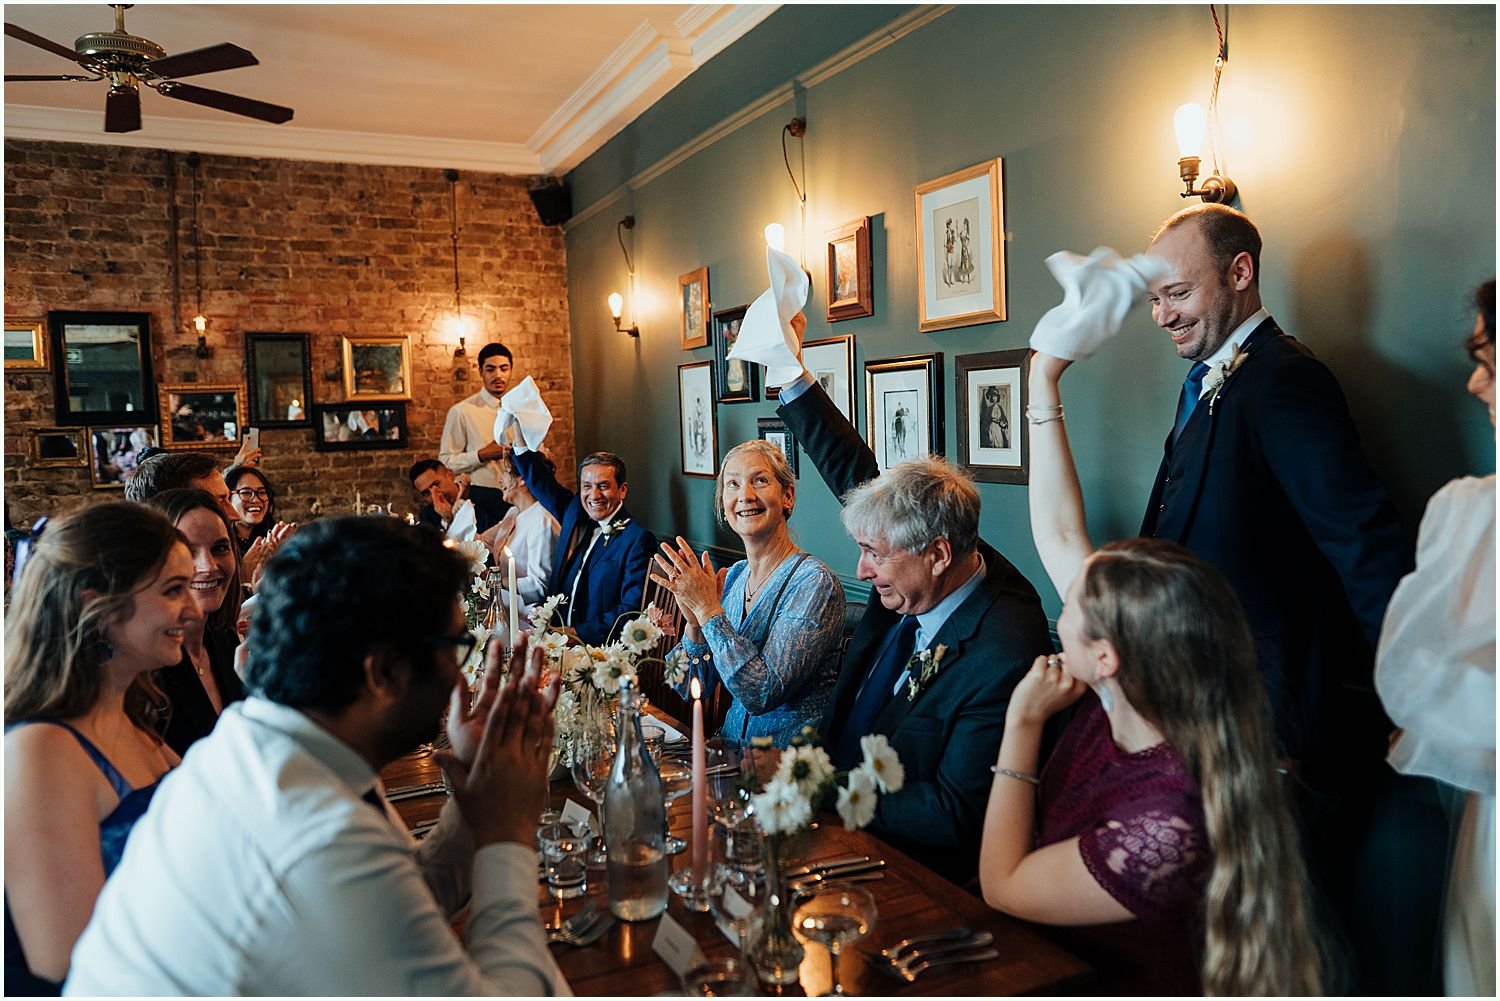 Guests greeting wedding couple in dining room at Lady Ottoline Pub